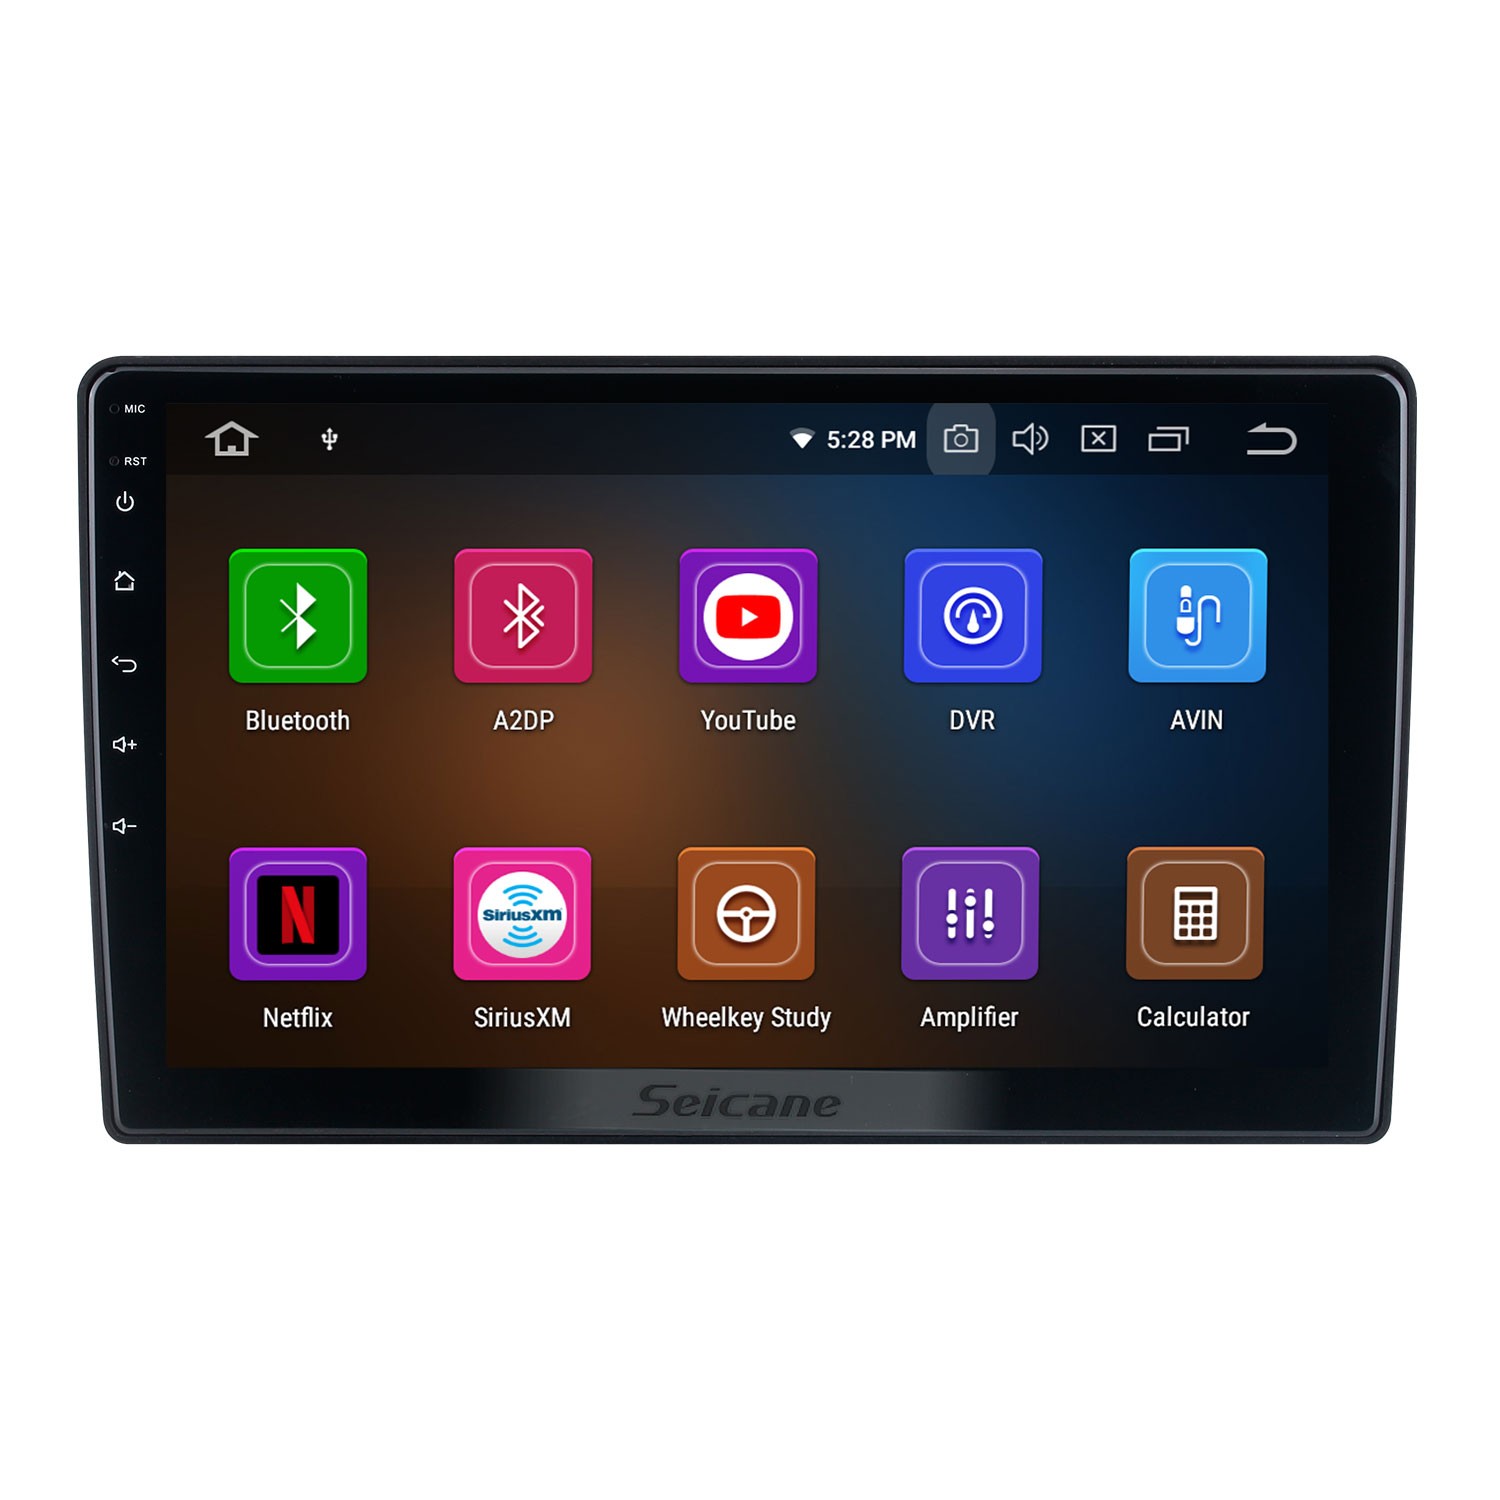 For Citroen C3 DS3 7 Touchscreen Android Head Unit Navi GPS CarPlay